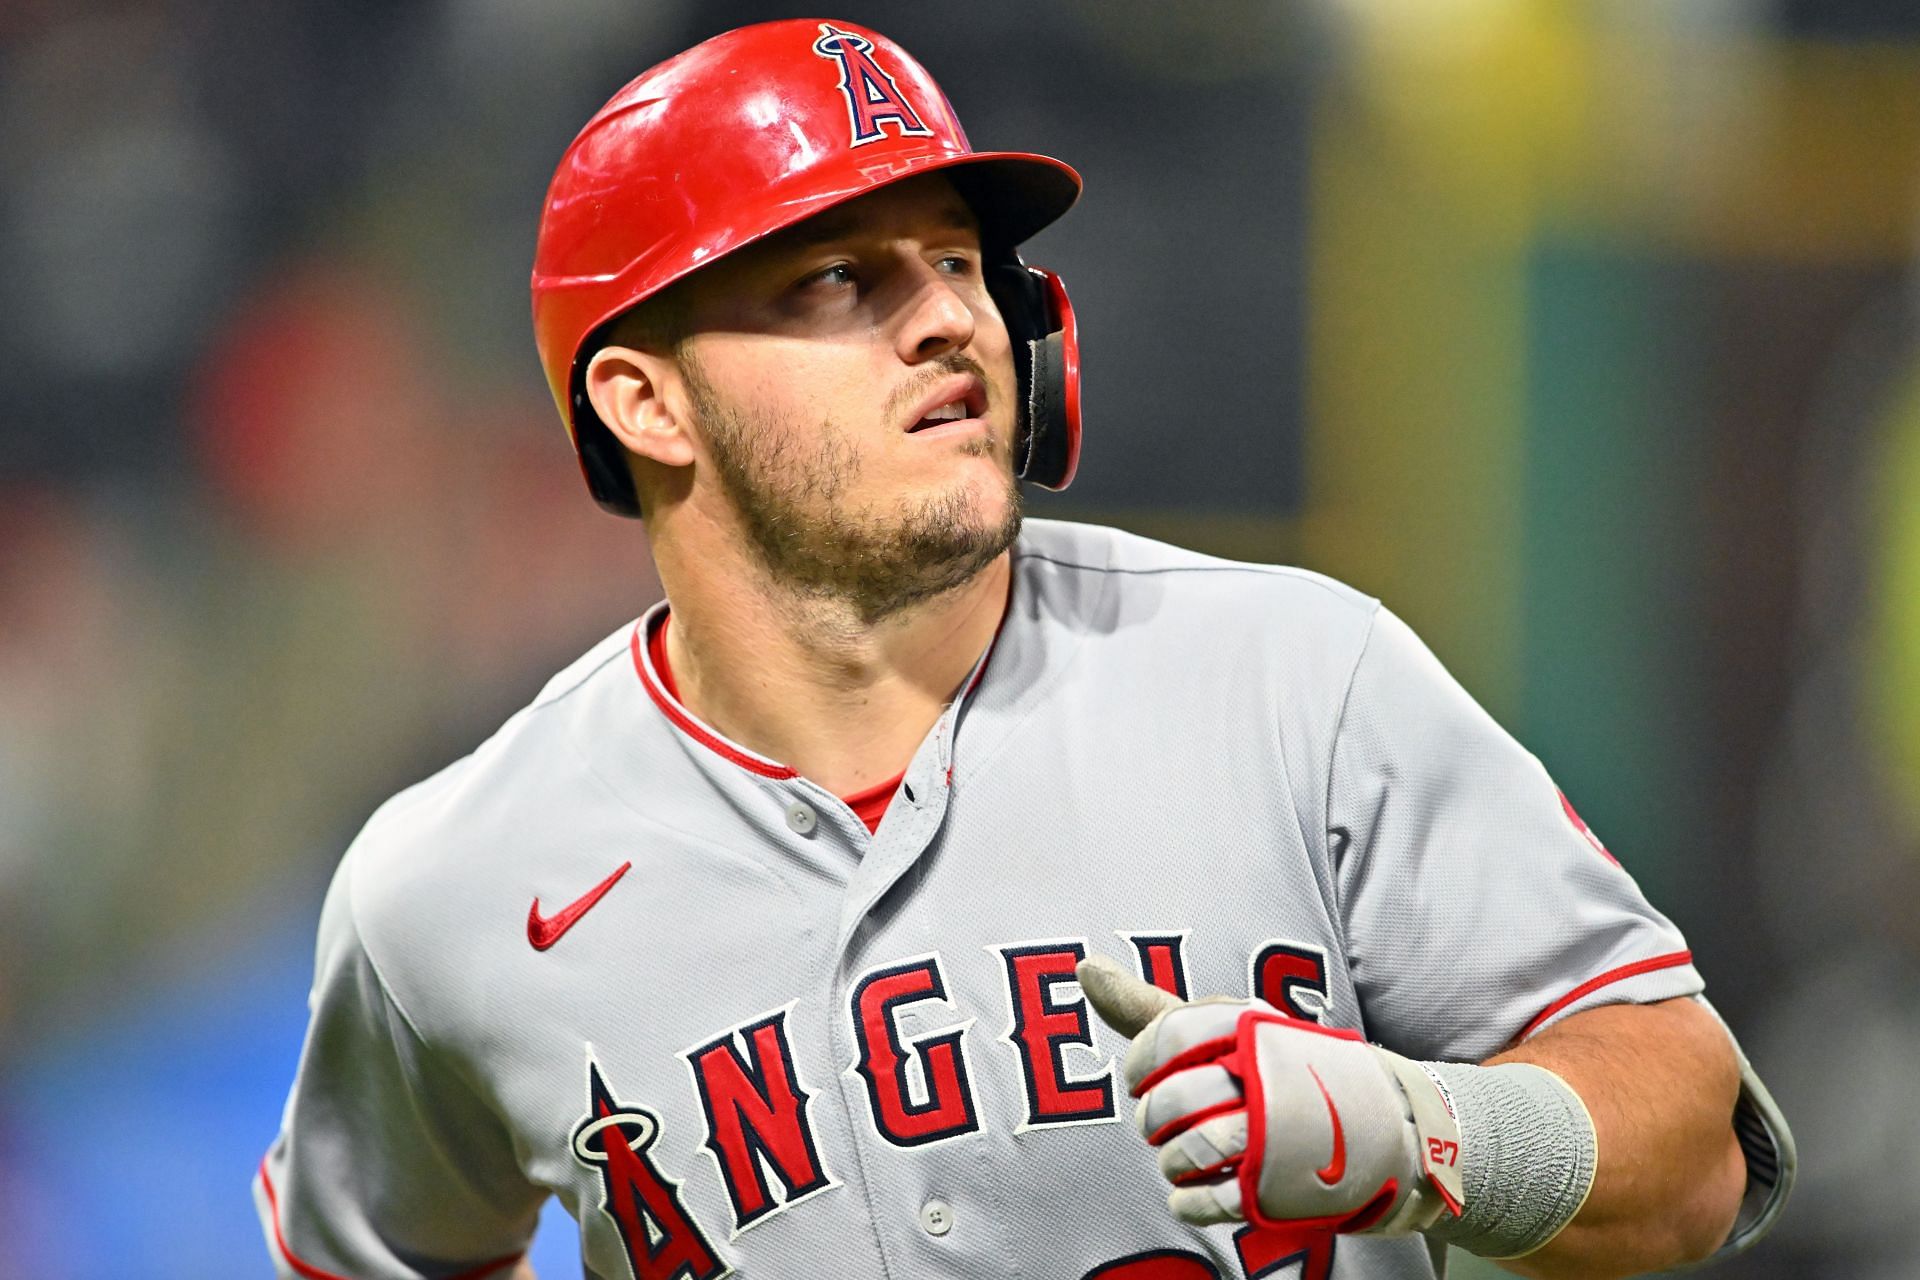 Angels Mike Trout  Mike trout, Play baseball, Baseball players